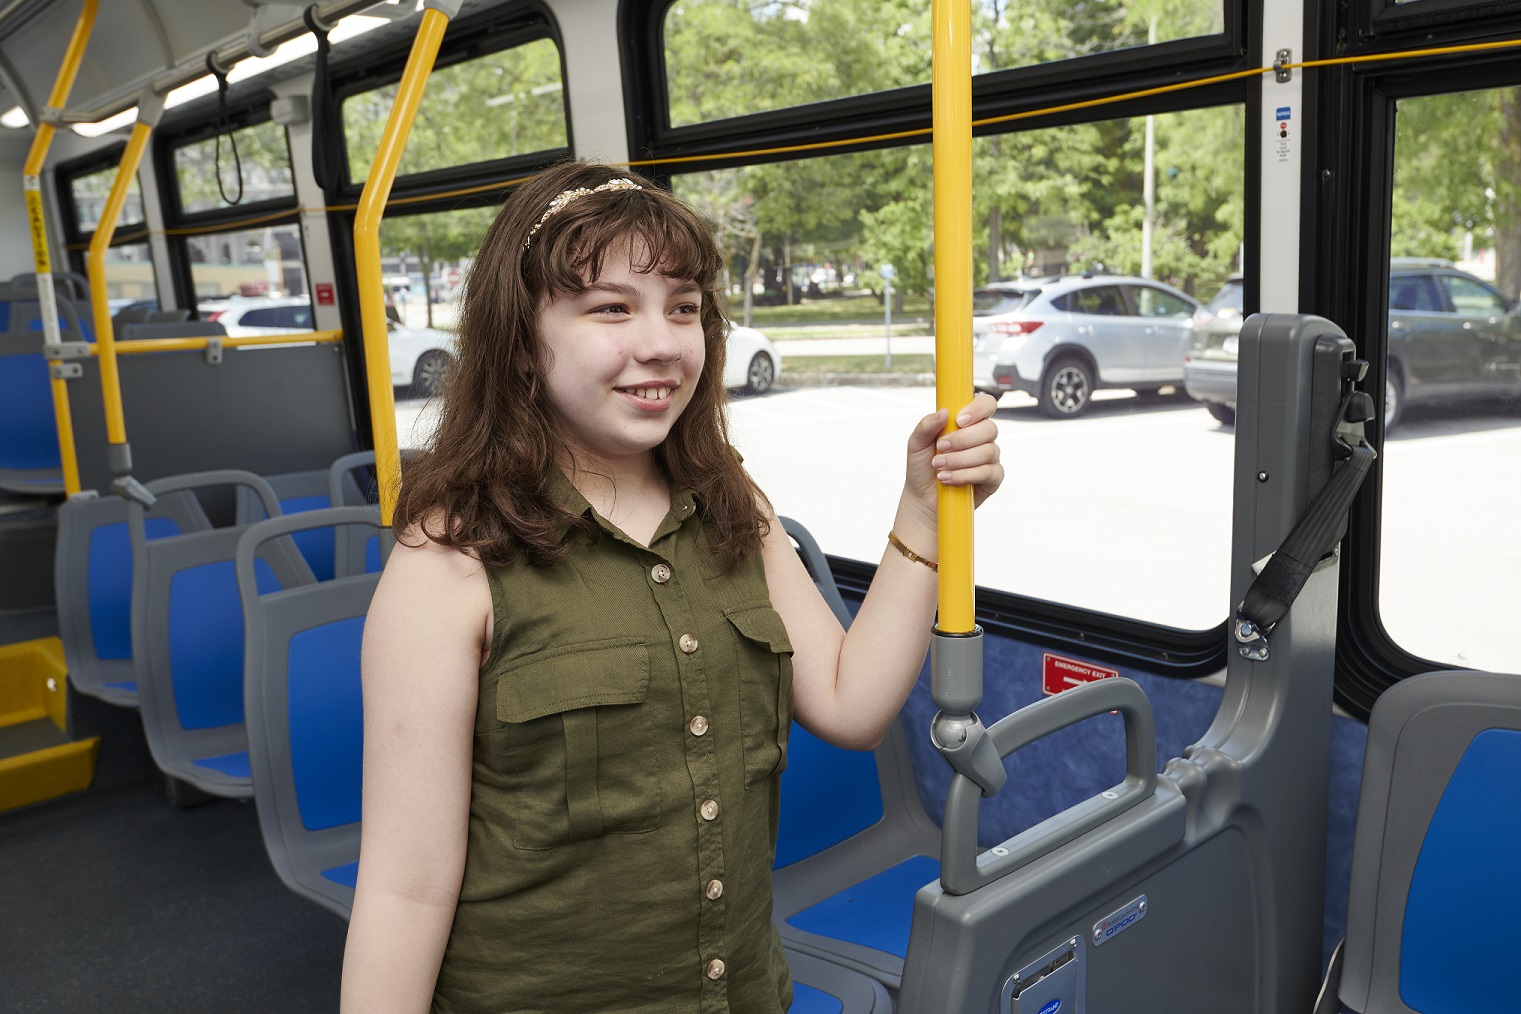 young woman riding the bus